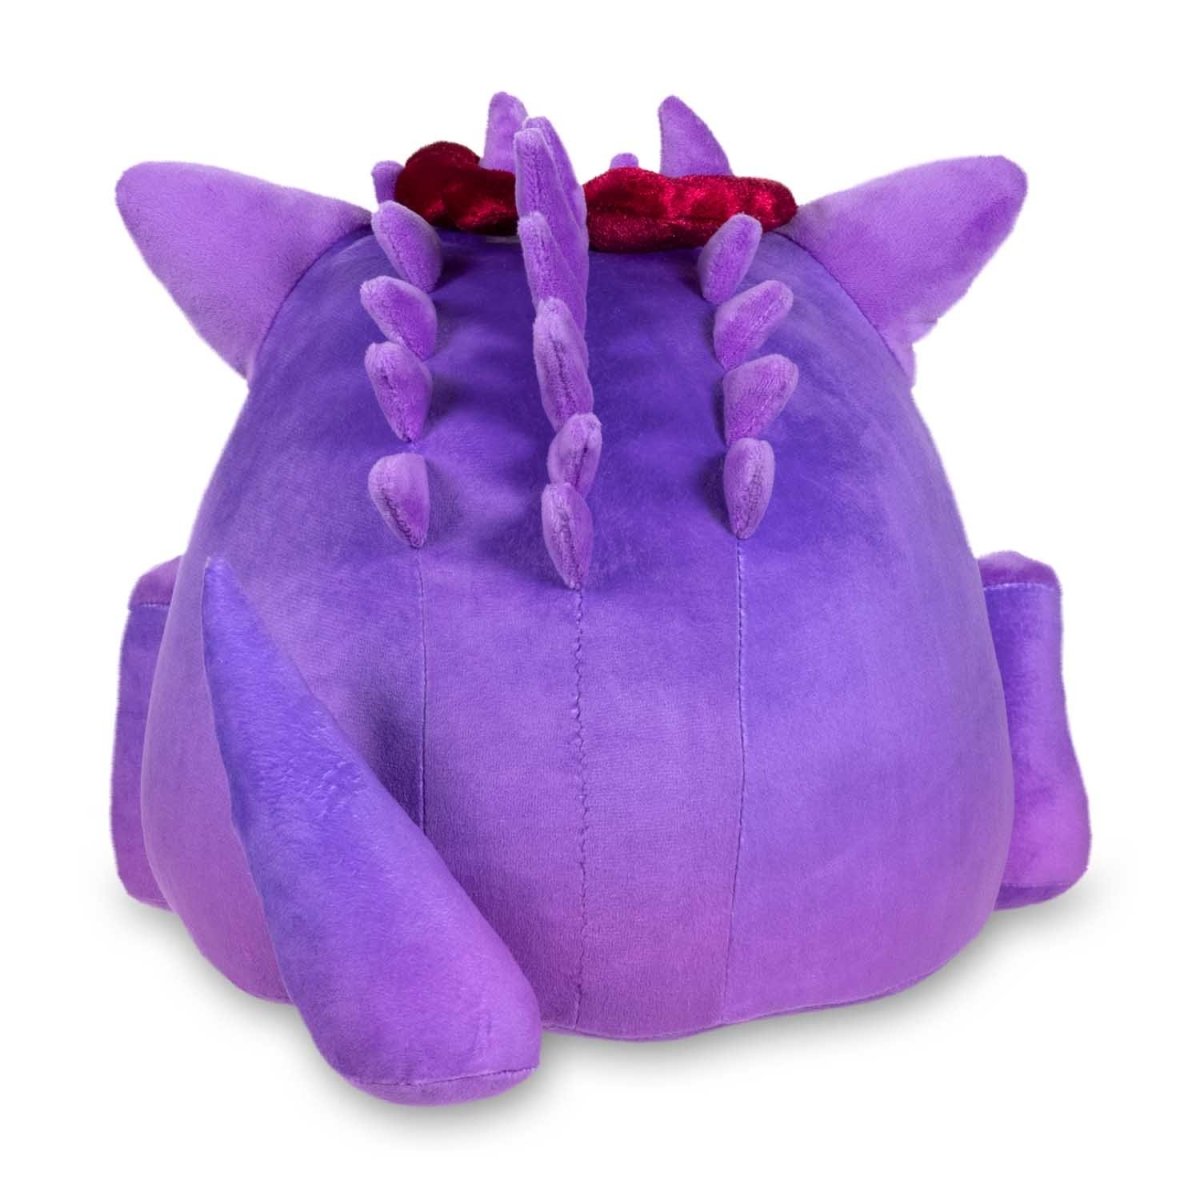 Gengar Giant Plush with tongue out